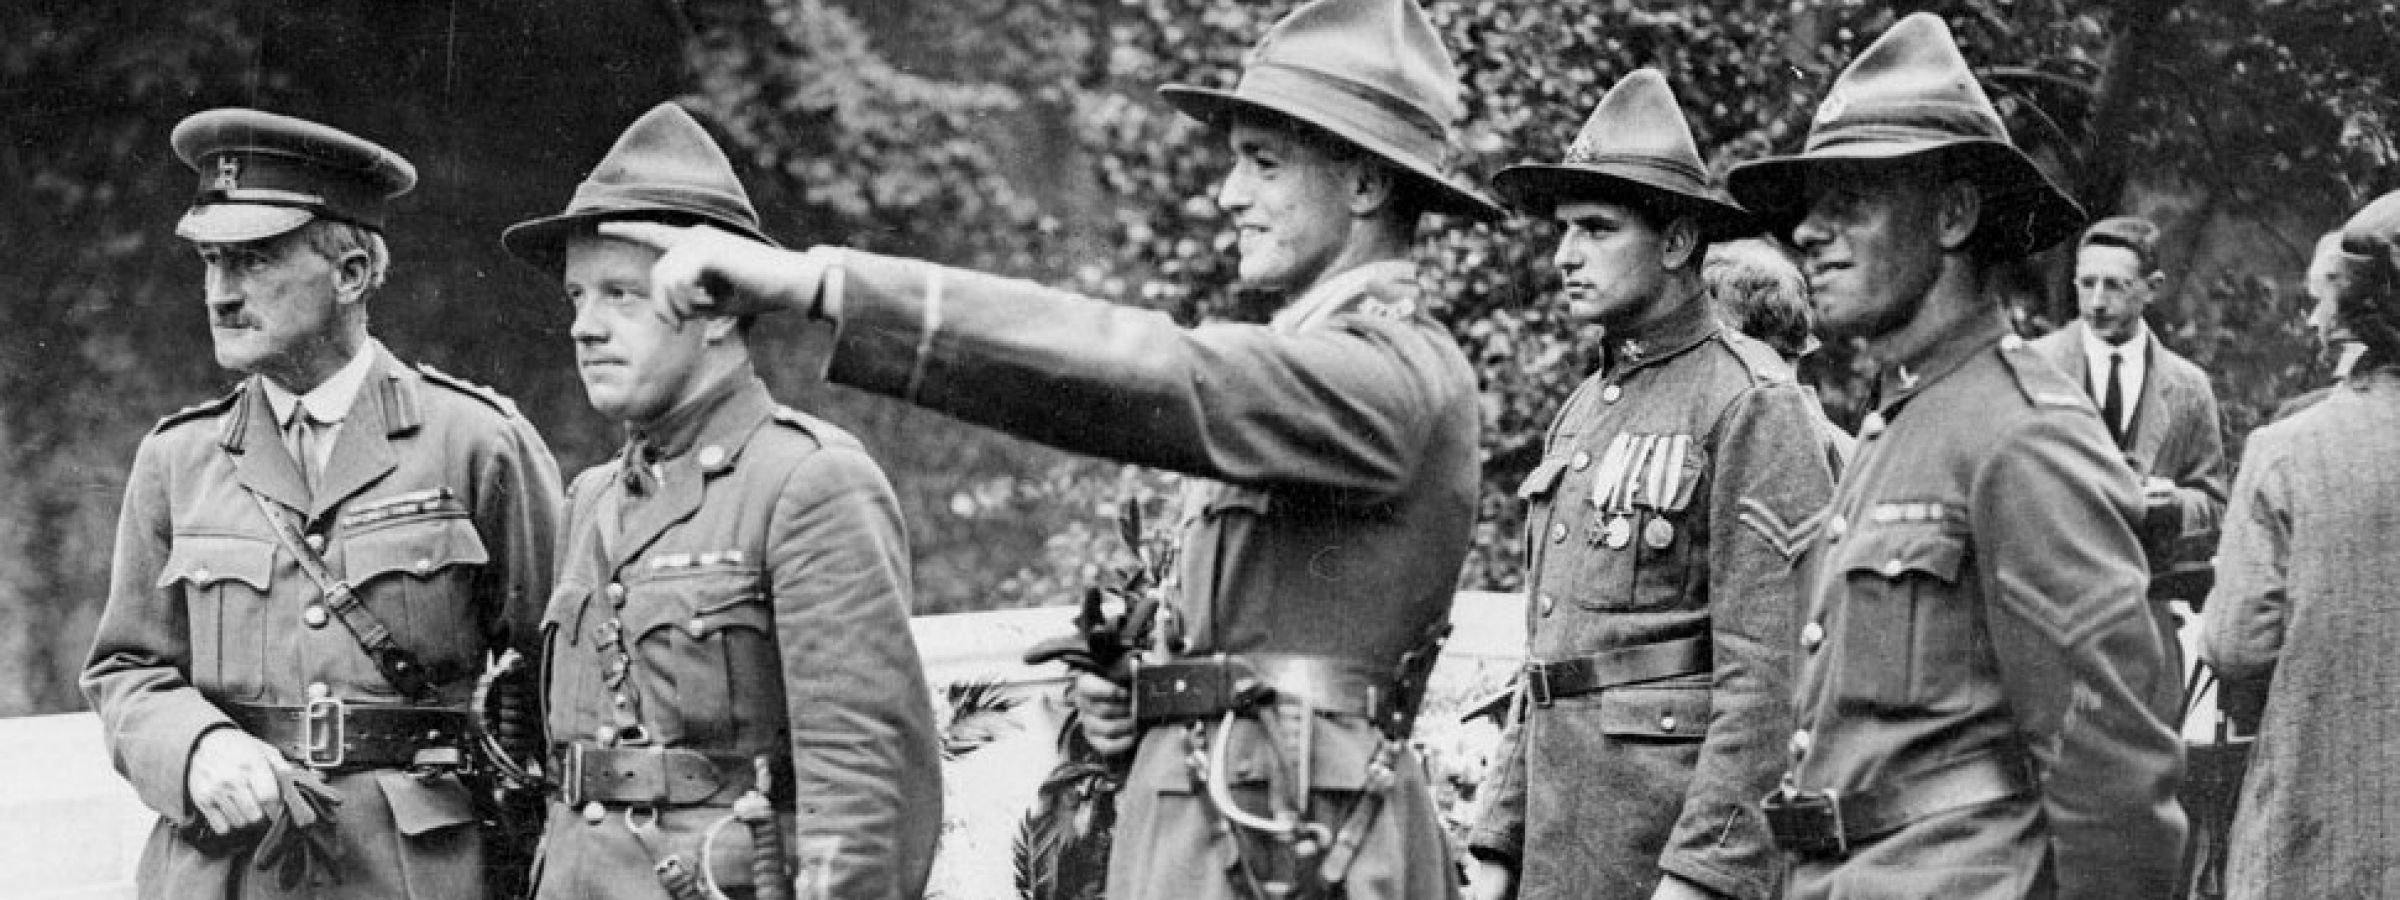 Leslie Averill (pointing) at the dedication ceremony for the New Zealand memorial at Le Quesnoy, France, 1923.